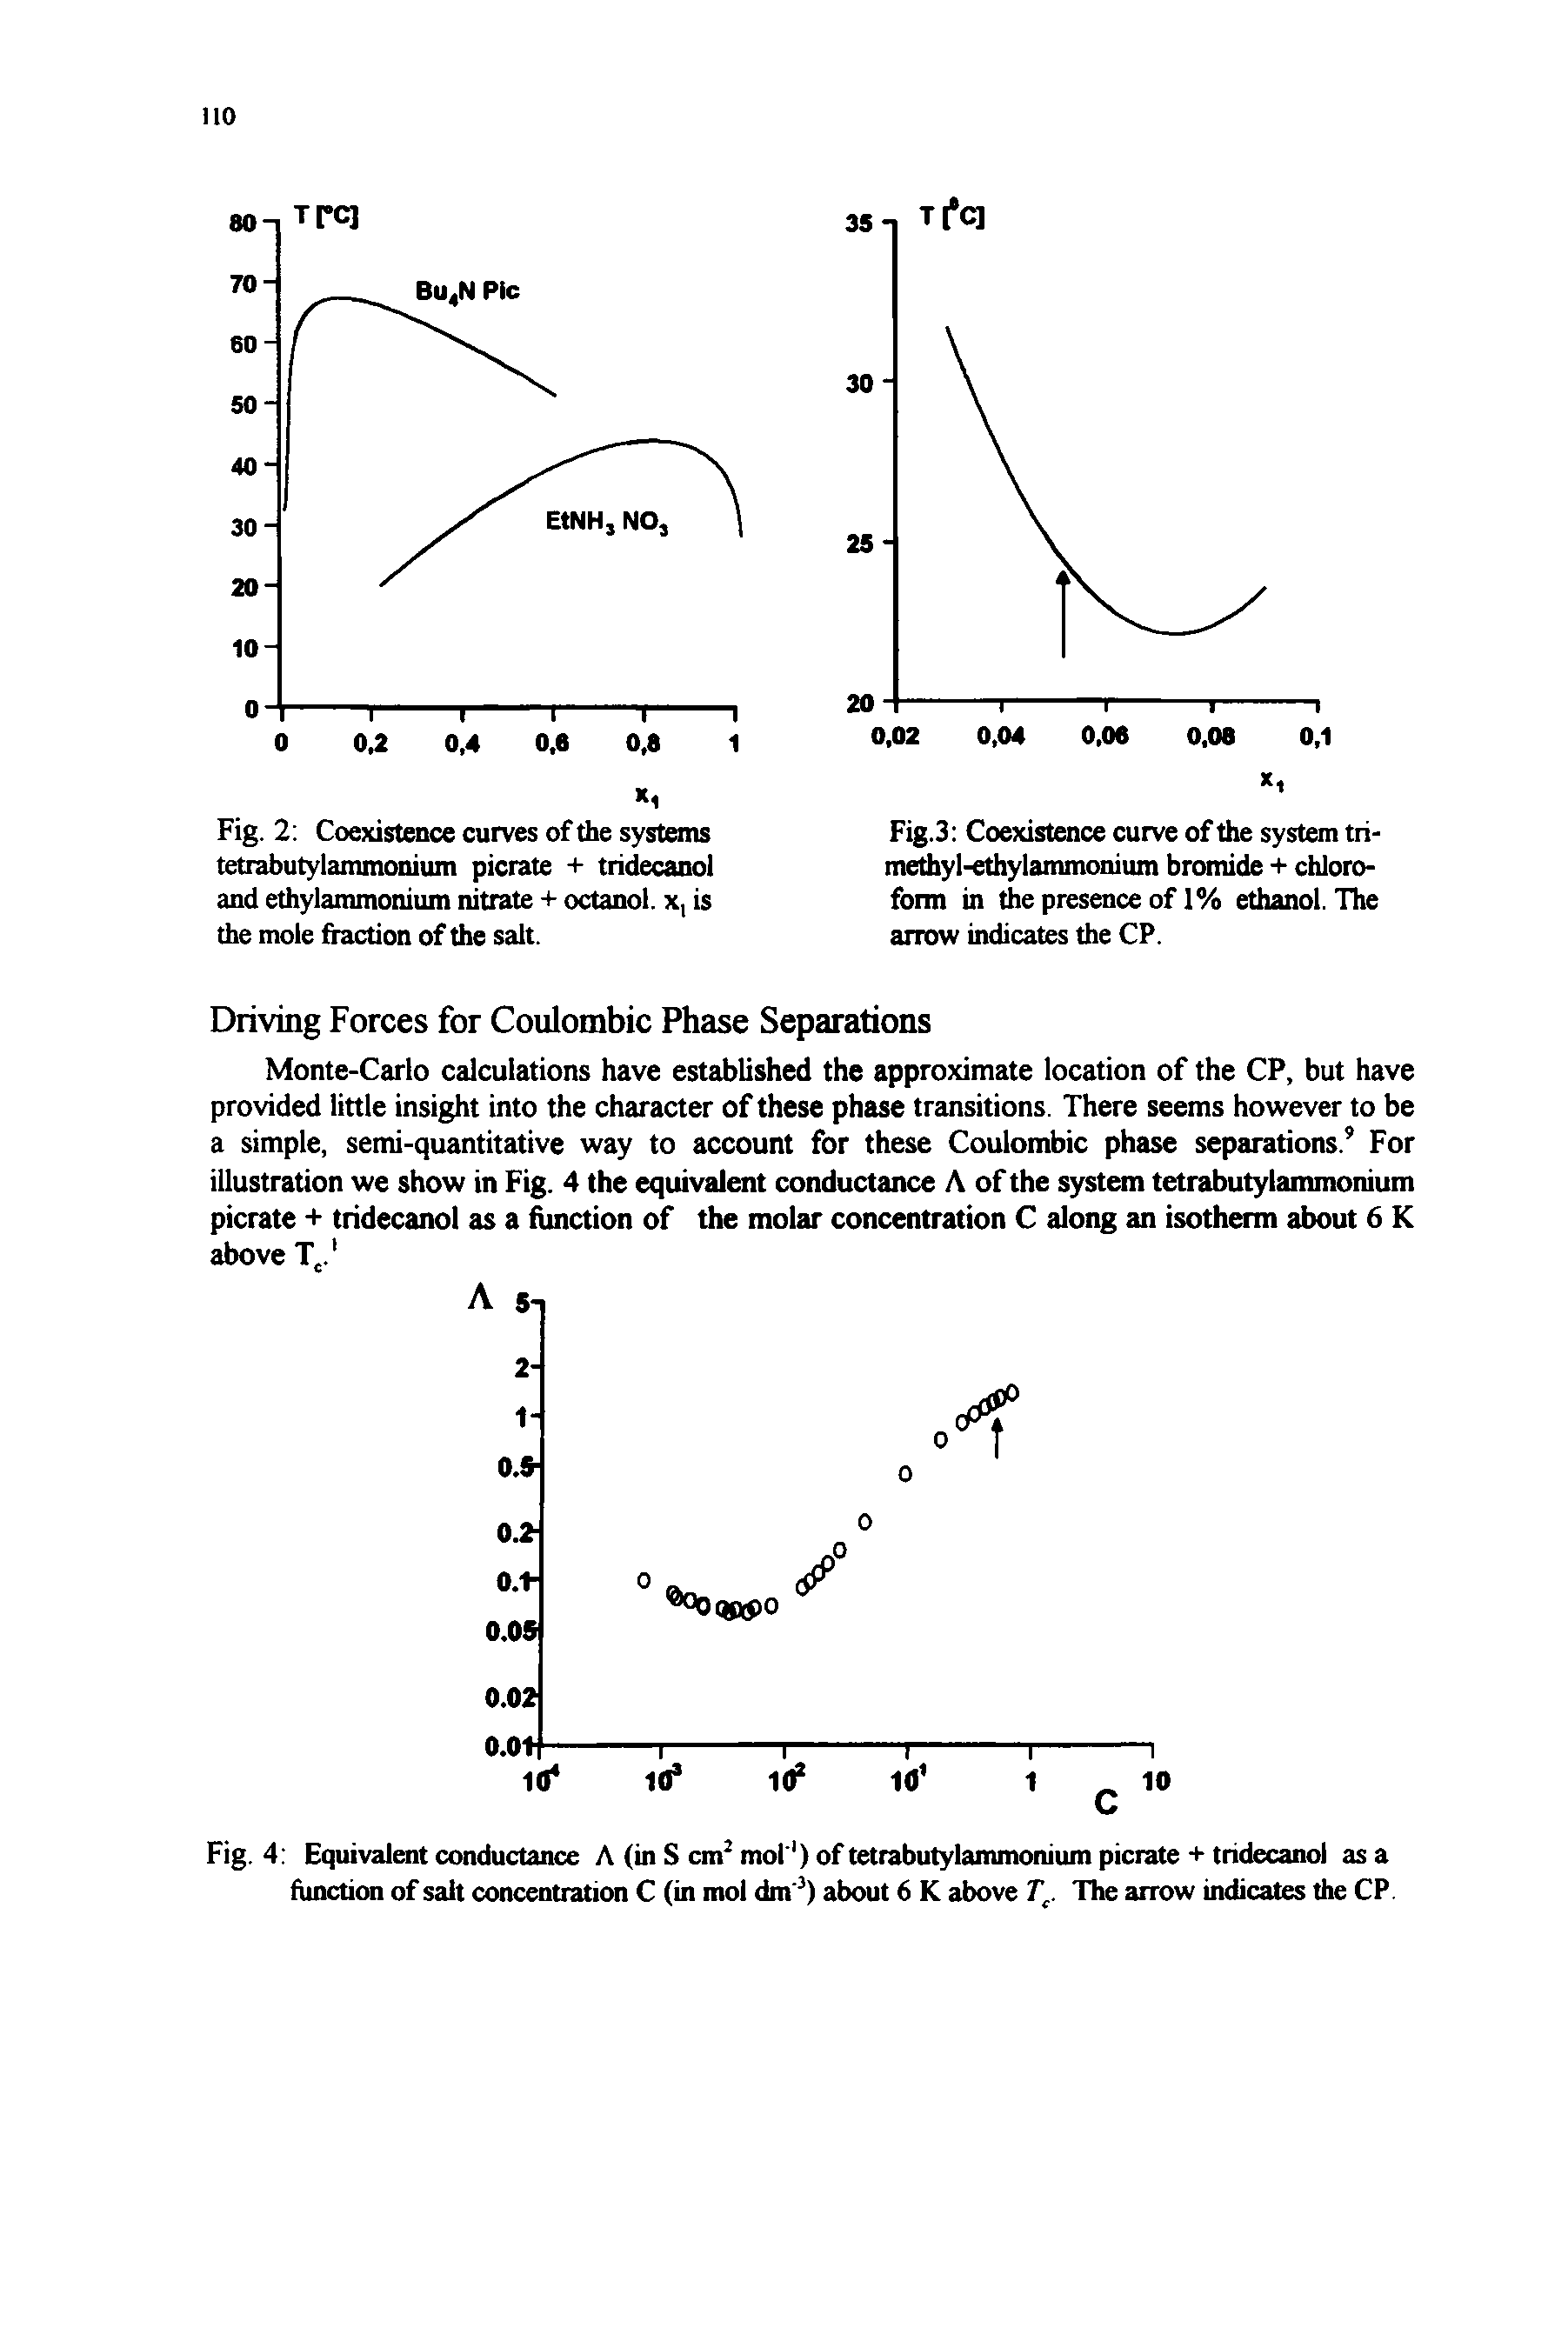 Fig. 2 Coexistence curves of the systems tetrabutylammonium picrate + tridecanol and ethylammonium nitrate + octanol. x, is the mole fiaction of the salt.